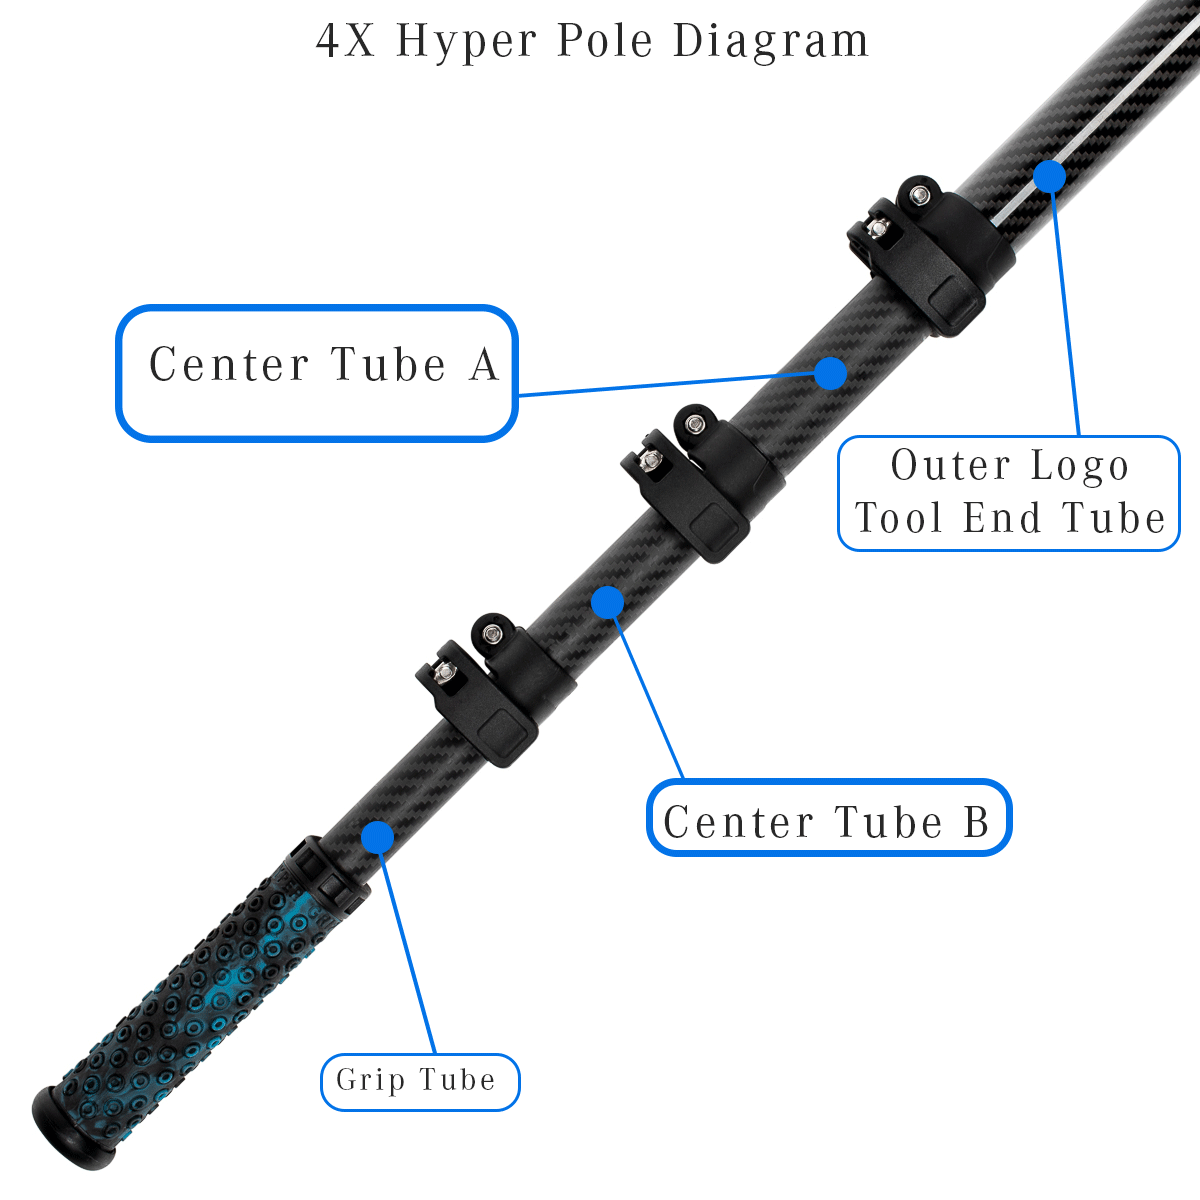 Center Individual Replacement Tube / Hyper Pole 3X, 4X